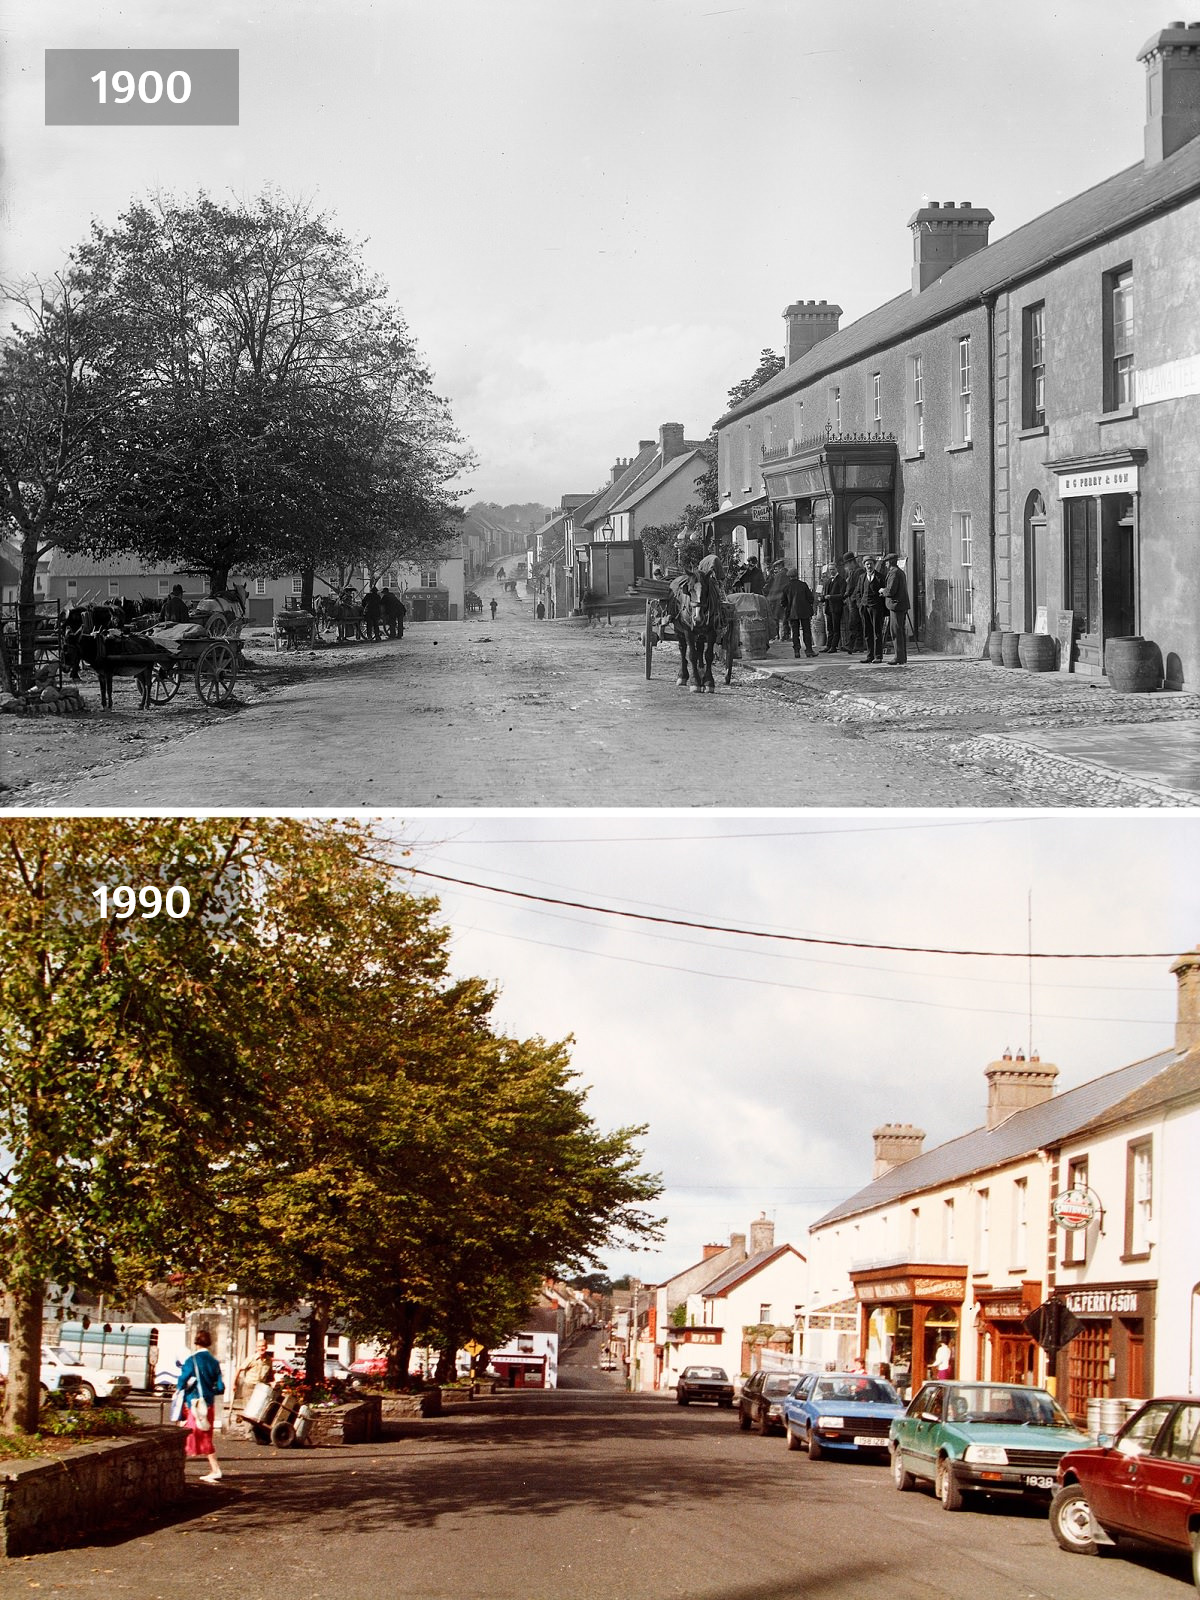 The Square, Rathdowney, Loais, 1900-1990